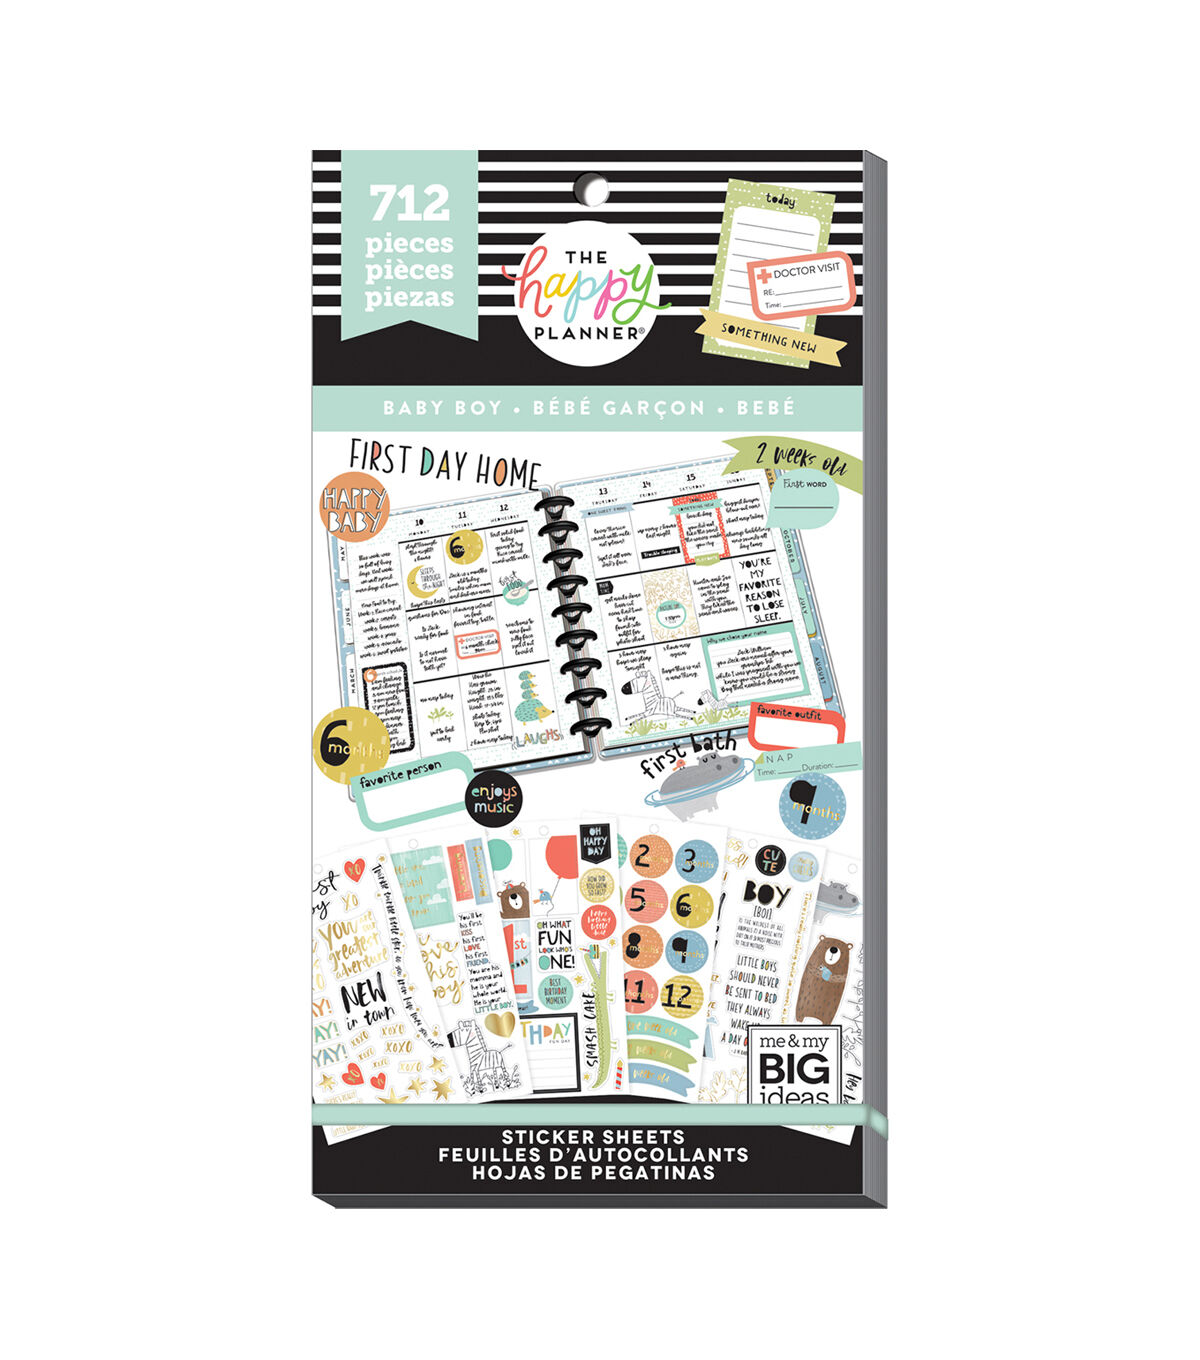 The Happy Planner Fall Sticker Book 712 Stickers Me & My Big Ideas for sale online